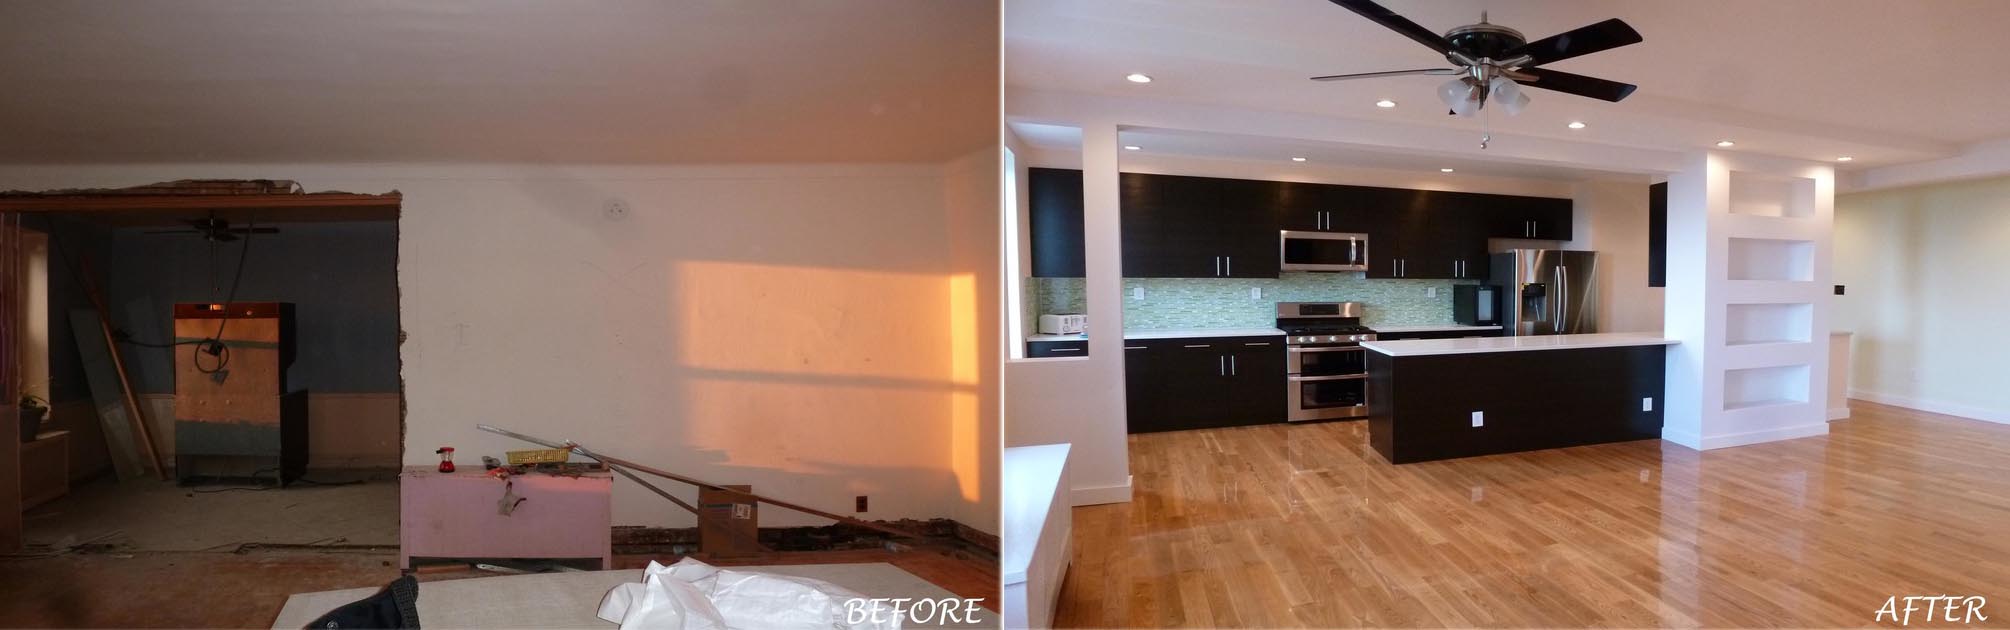 Laura S - Brooklyn, NY - Apartment Remodeling